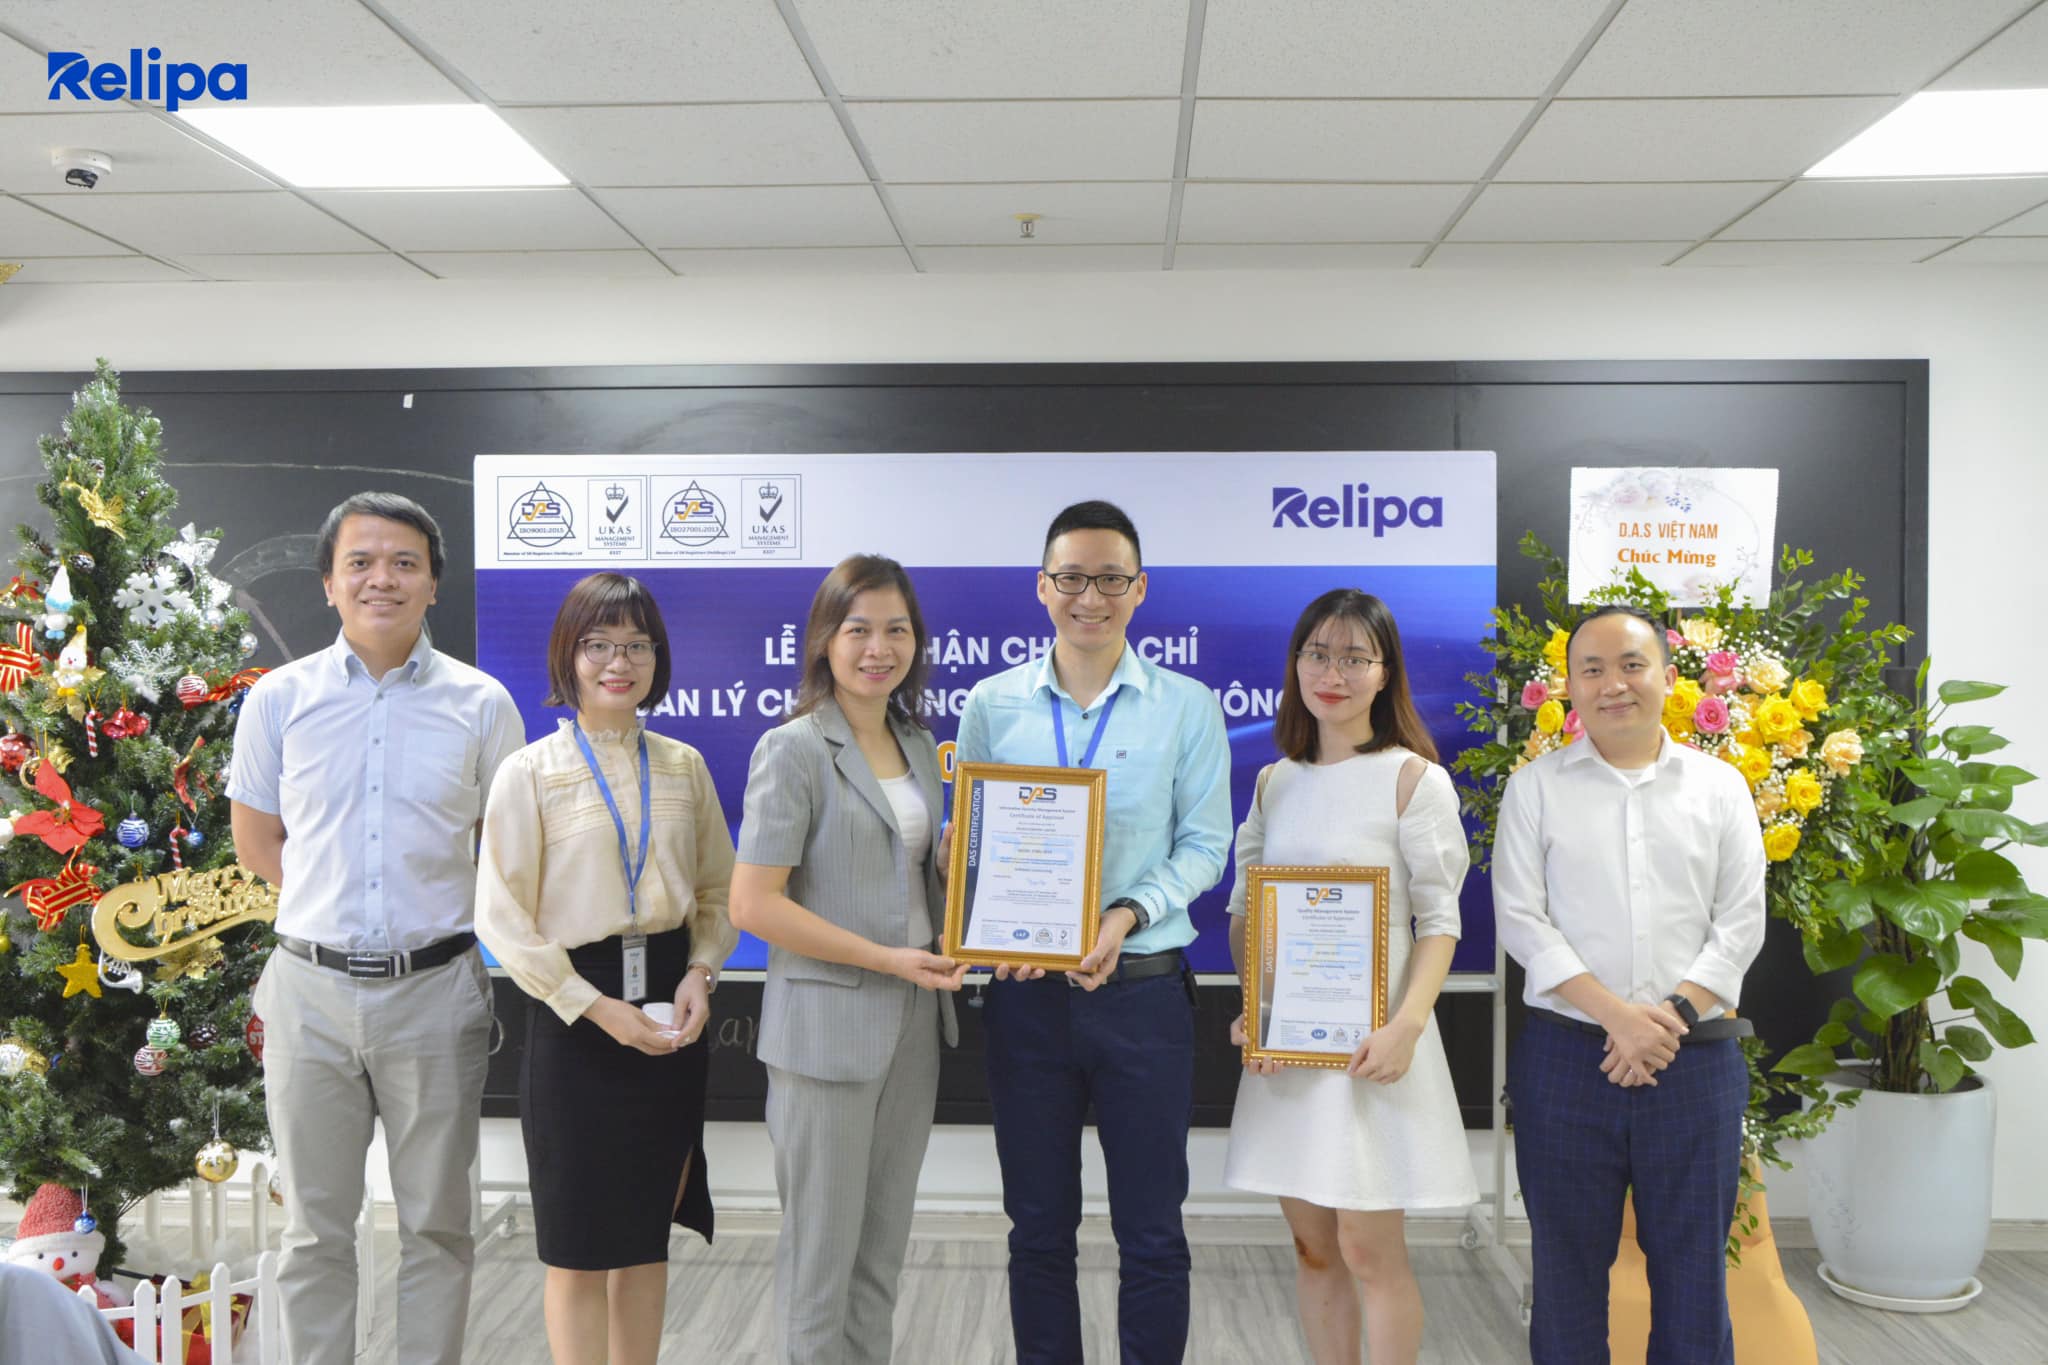 Proud to Announce Relipa is ISO/IEC27001 and ISO9001 certified!